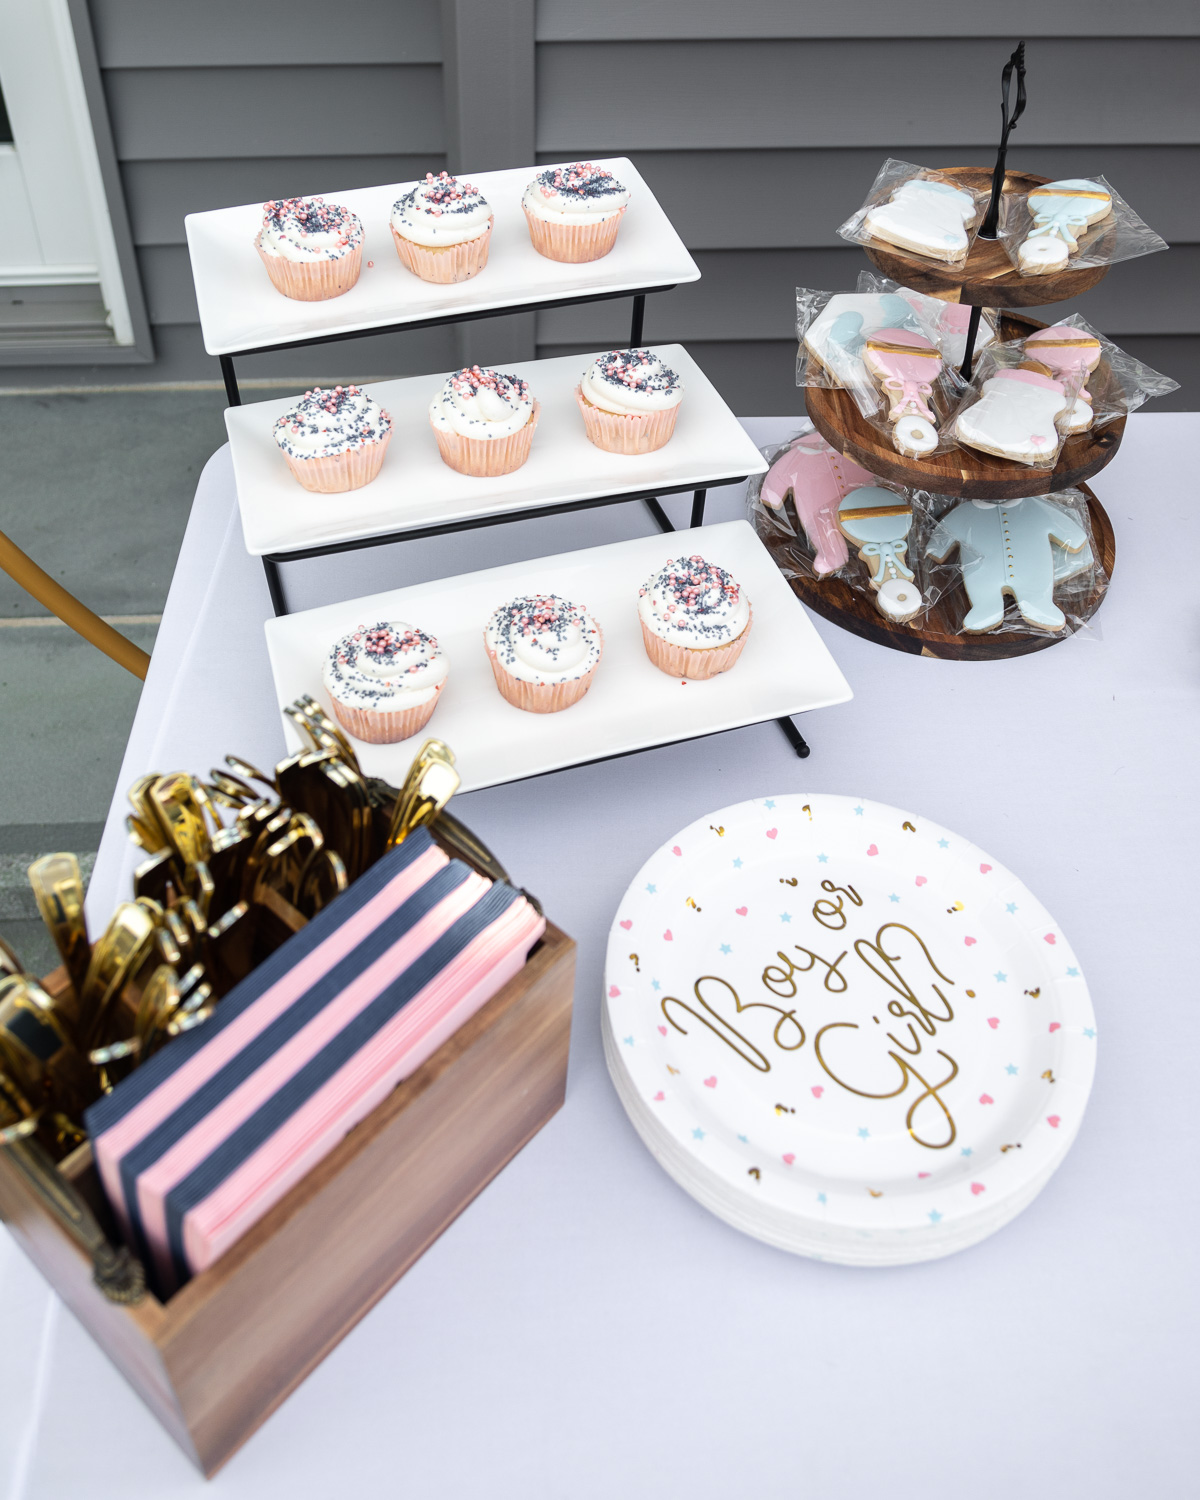 lawler-gender-reveal-party-dessert-table-cupcakes-and-sugar-cookies-the-glamorous-gal-blog